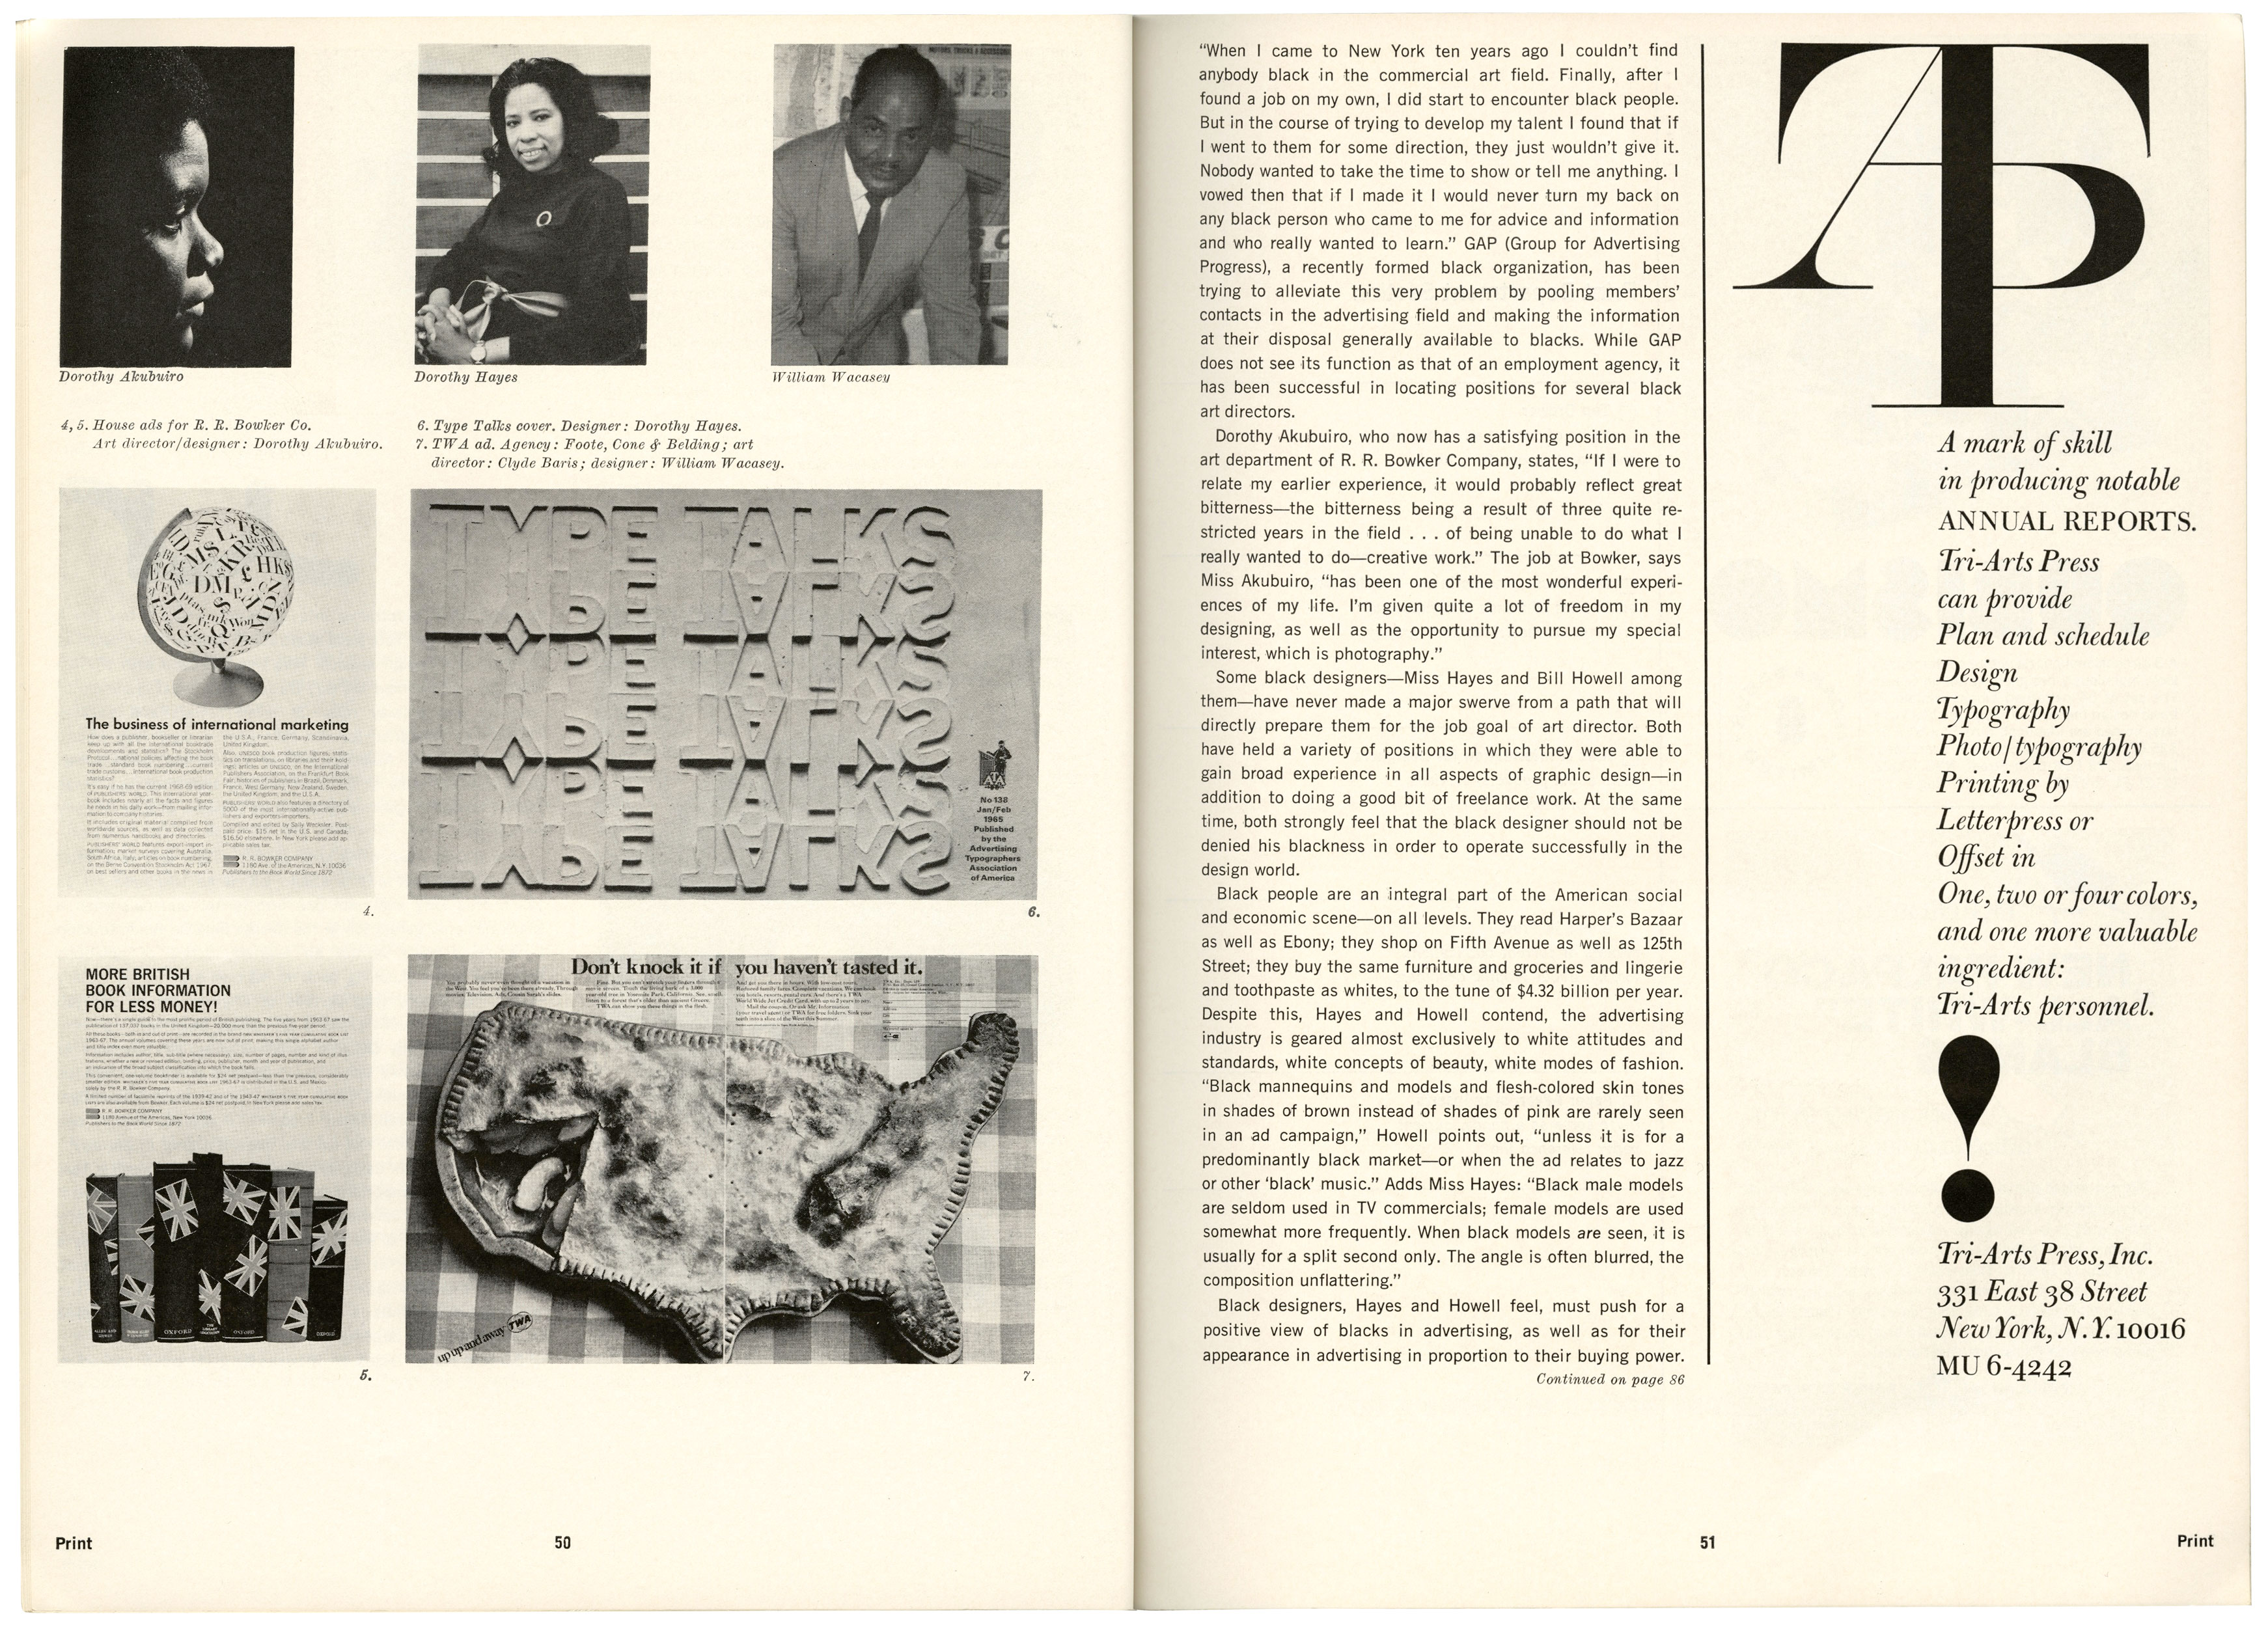 Print, The Black Experience in Graphic Design, 1968.